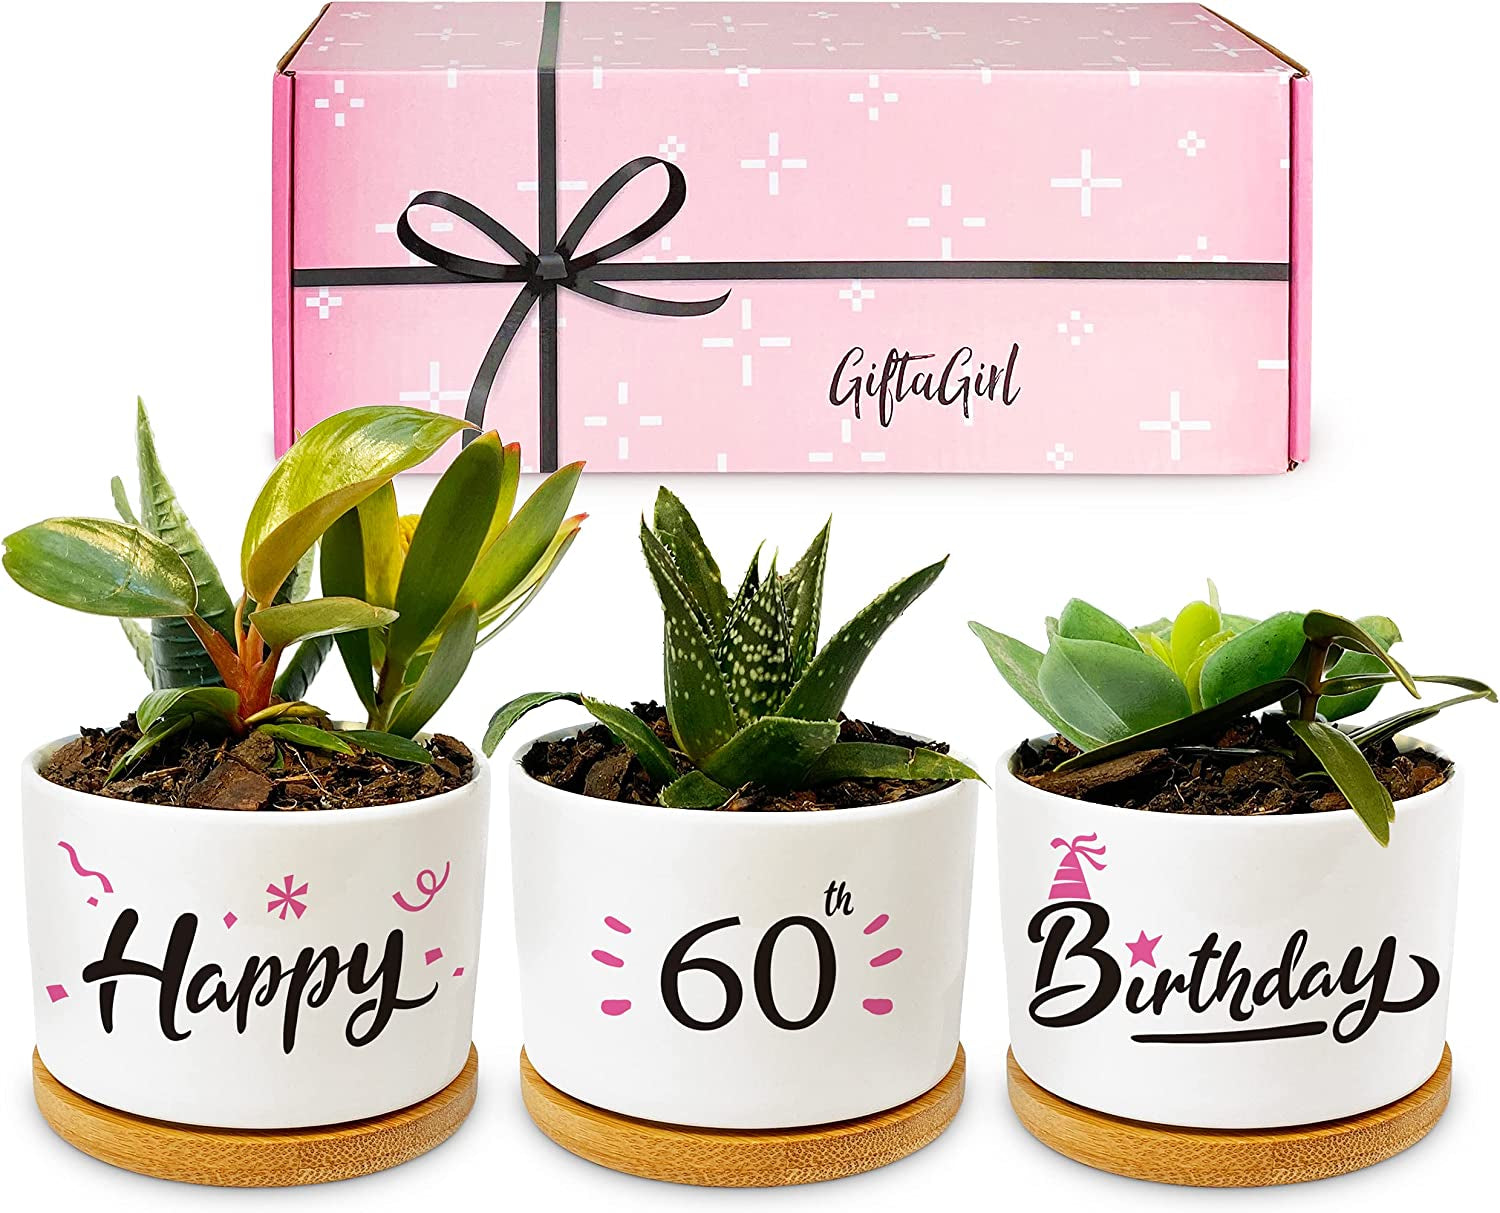 GIFTAGIRL, GIFTAGIRL 60Th Birthday Gifts for Women - Keepsake 60Th Birthday Gift Idea, like Our Pretty Pots Are for 60 Year Old Women or 60Th Birthday Decor and Arrive Beautifully Gift Boxed